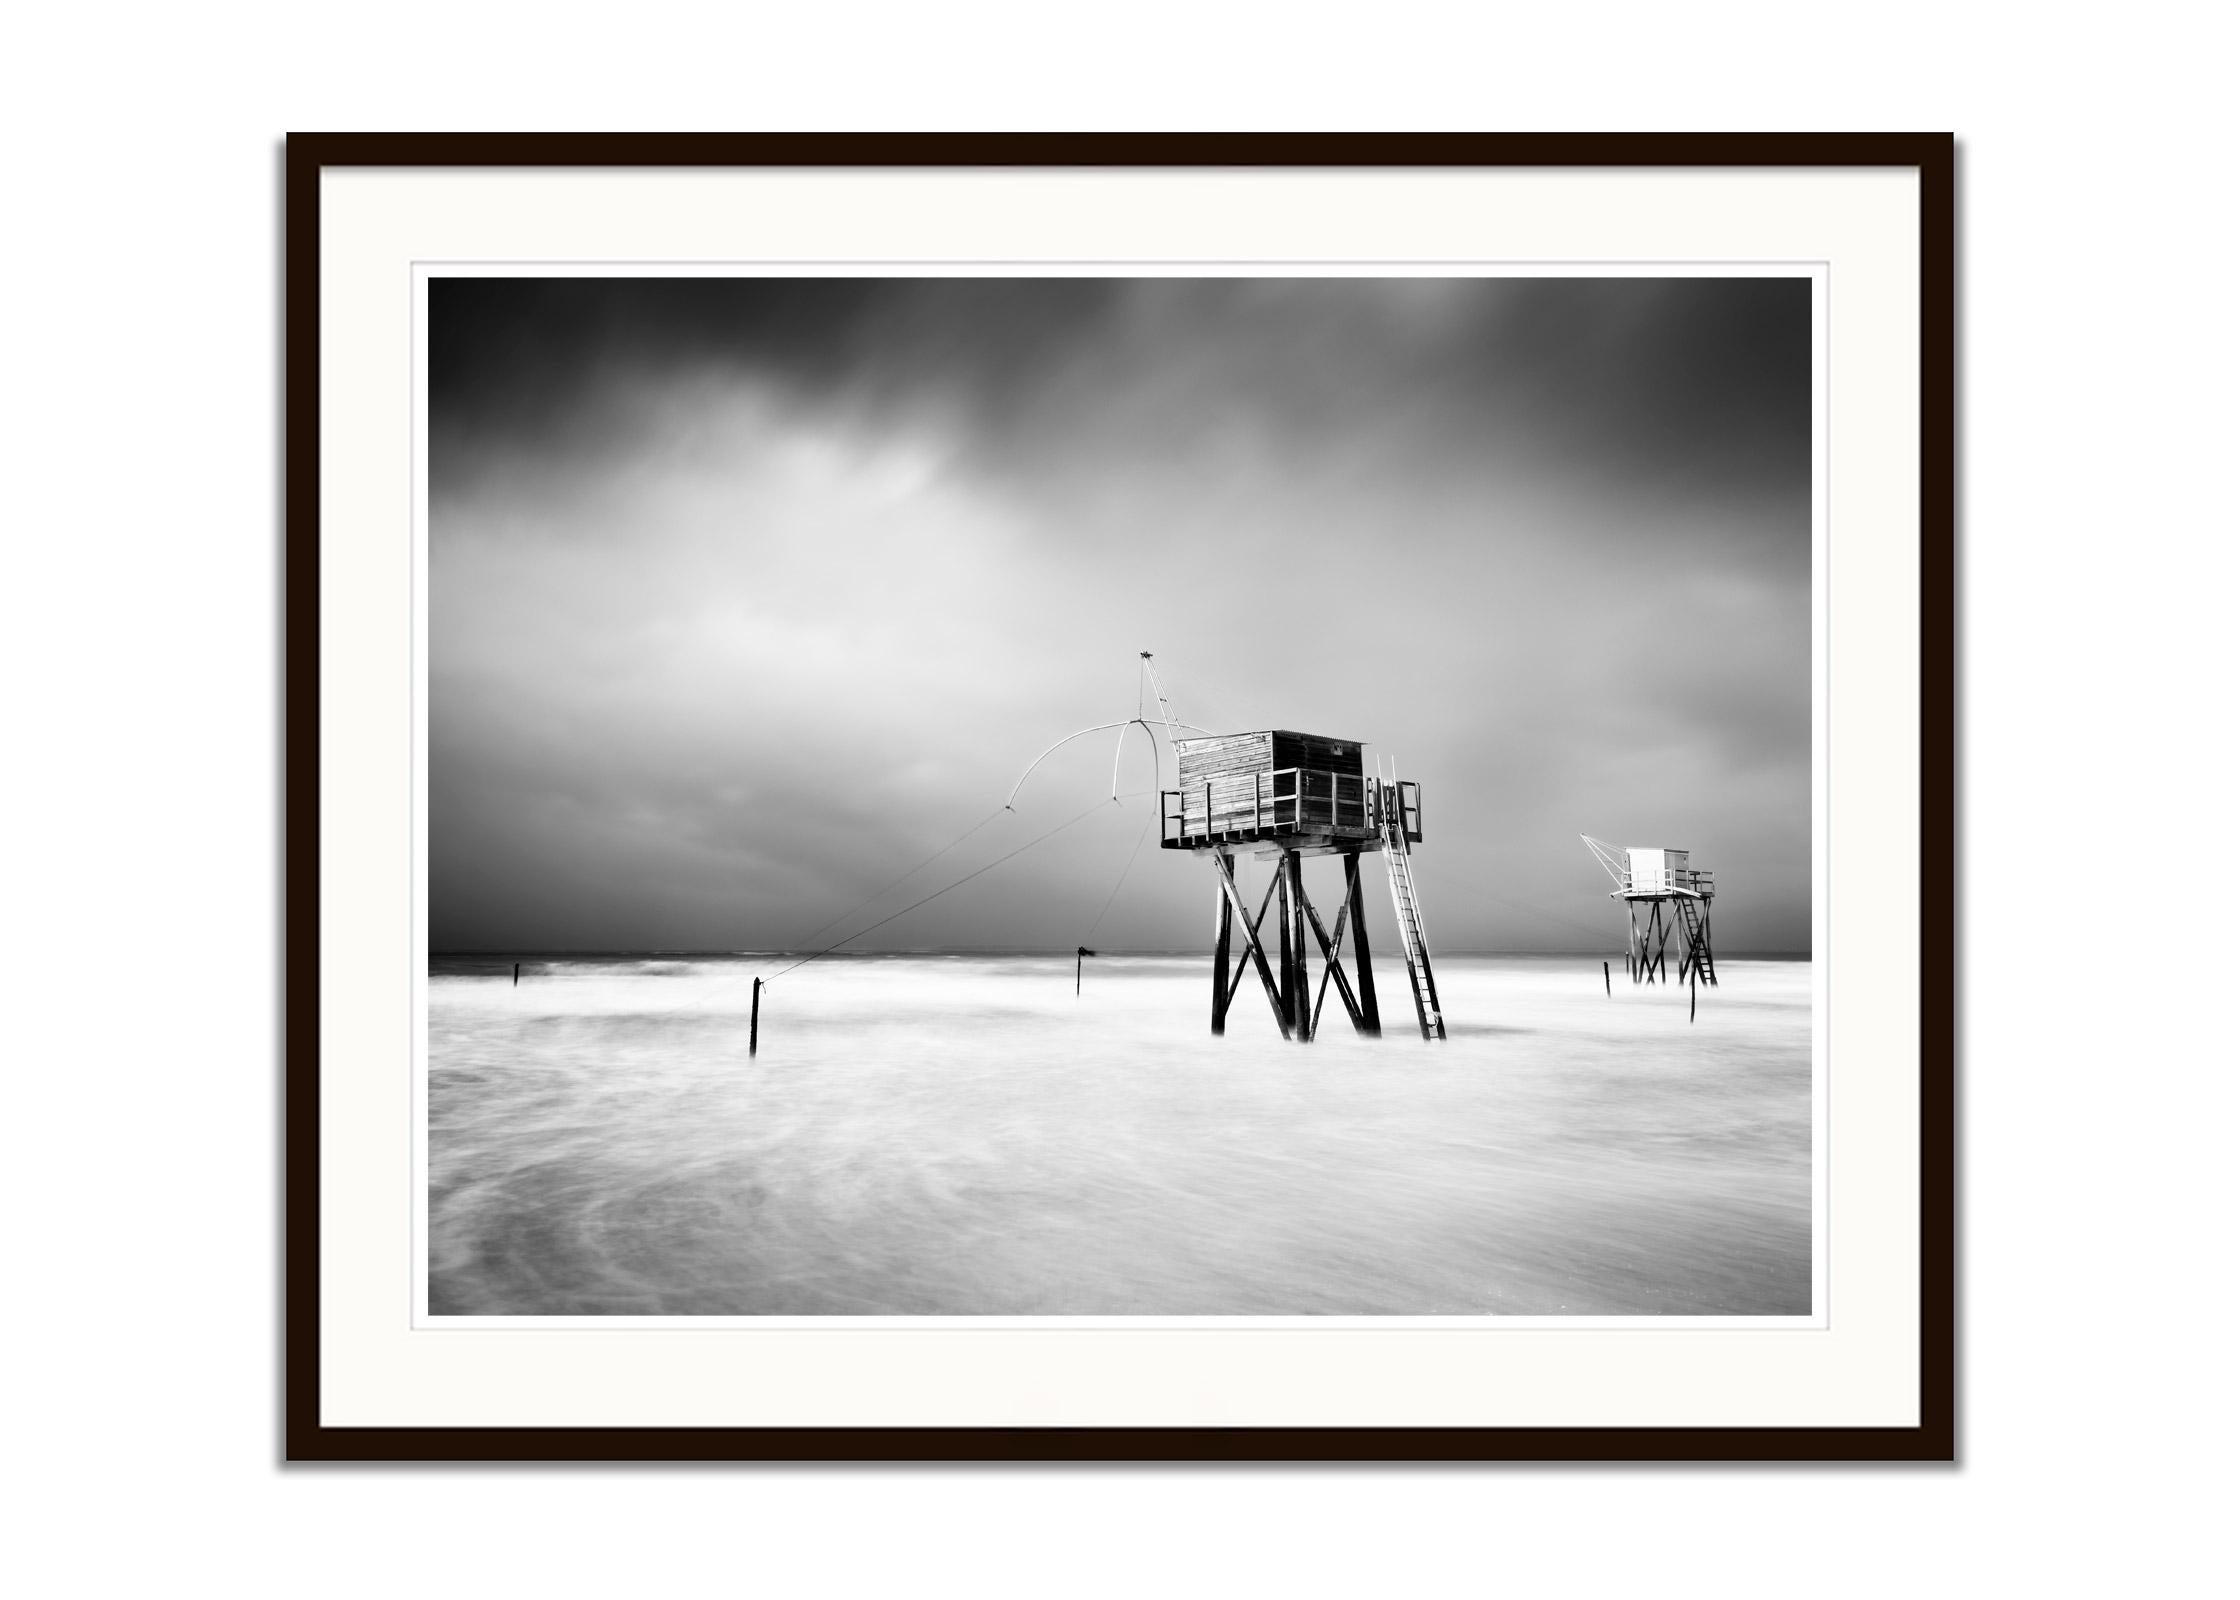 Fishing Hut On Stilts, surf, shoreline, storm, black white landscape photography - Gray Black and White Photograph by Gerald Berghammer